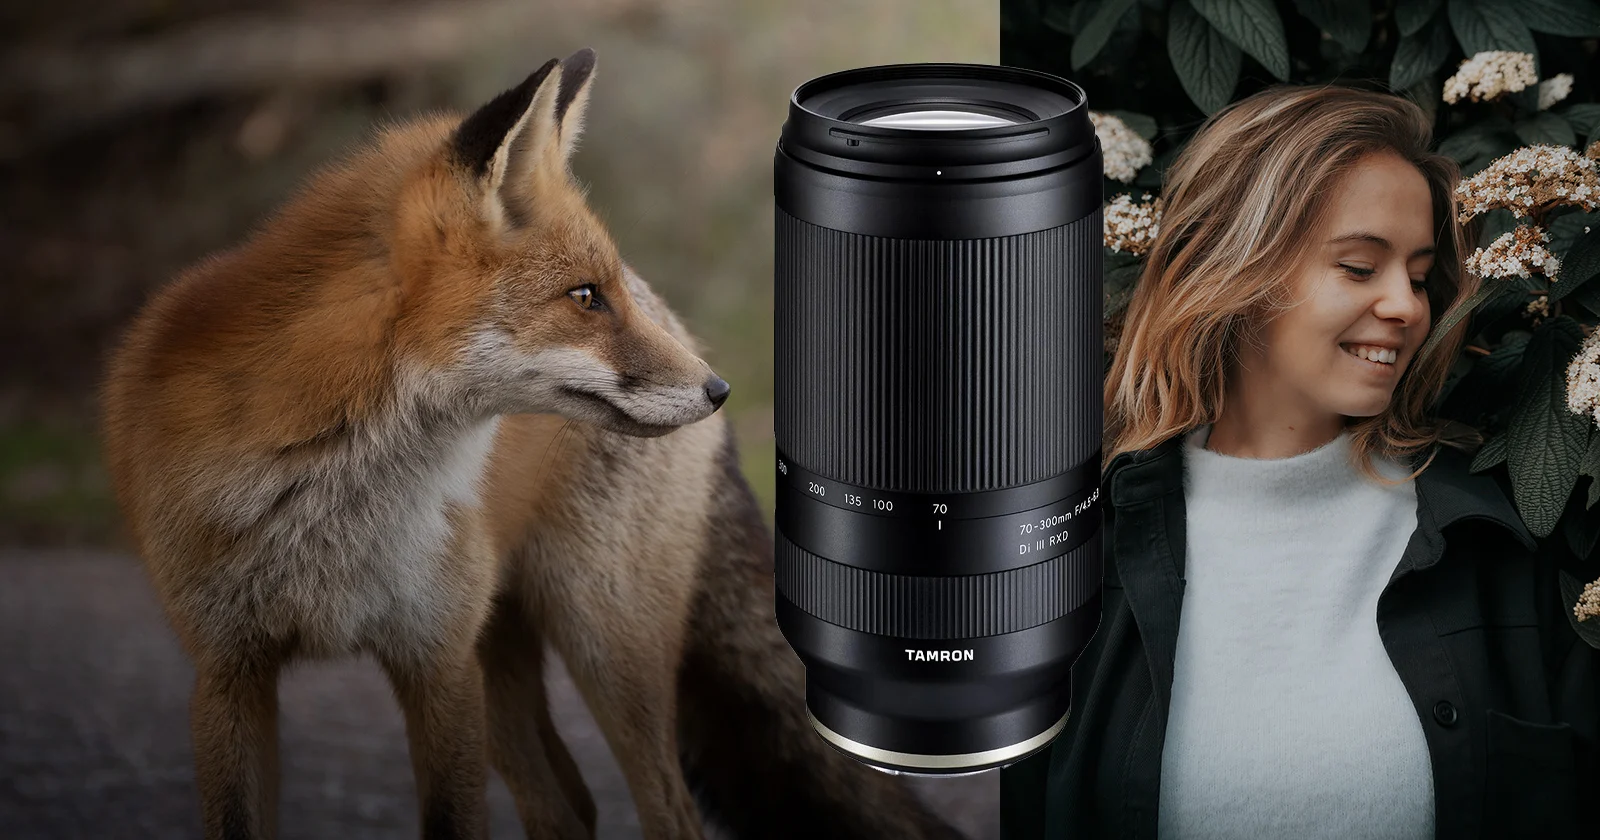 Hands On With Two Tamron Zooms For Sony E-Mount